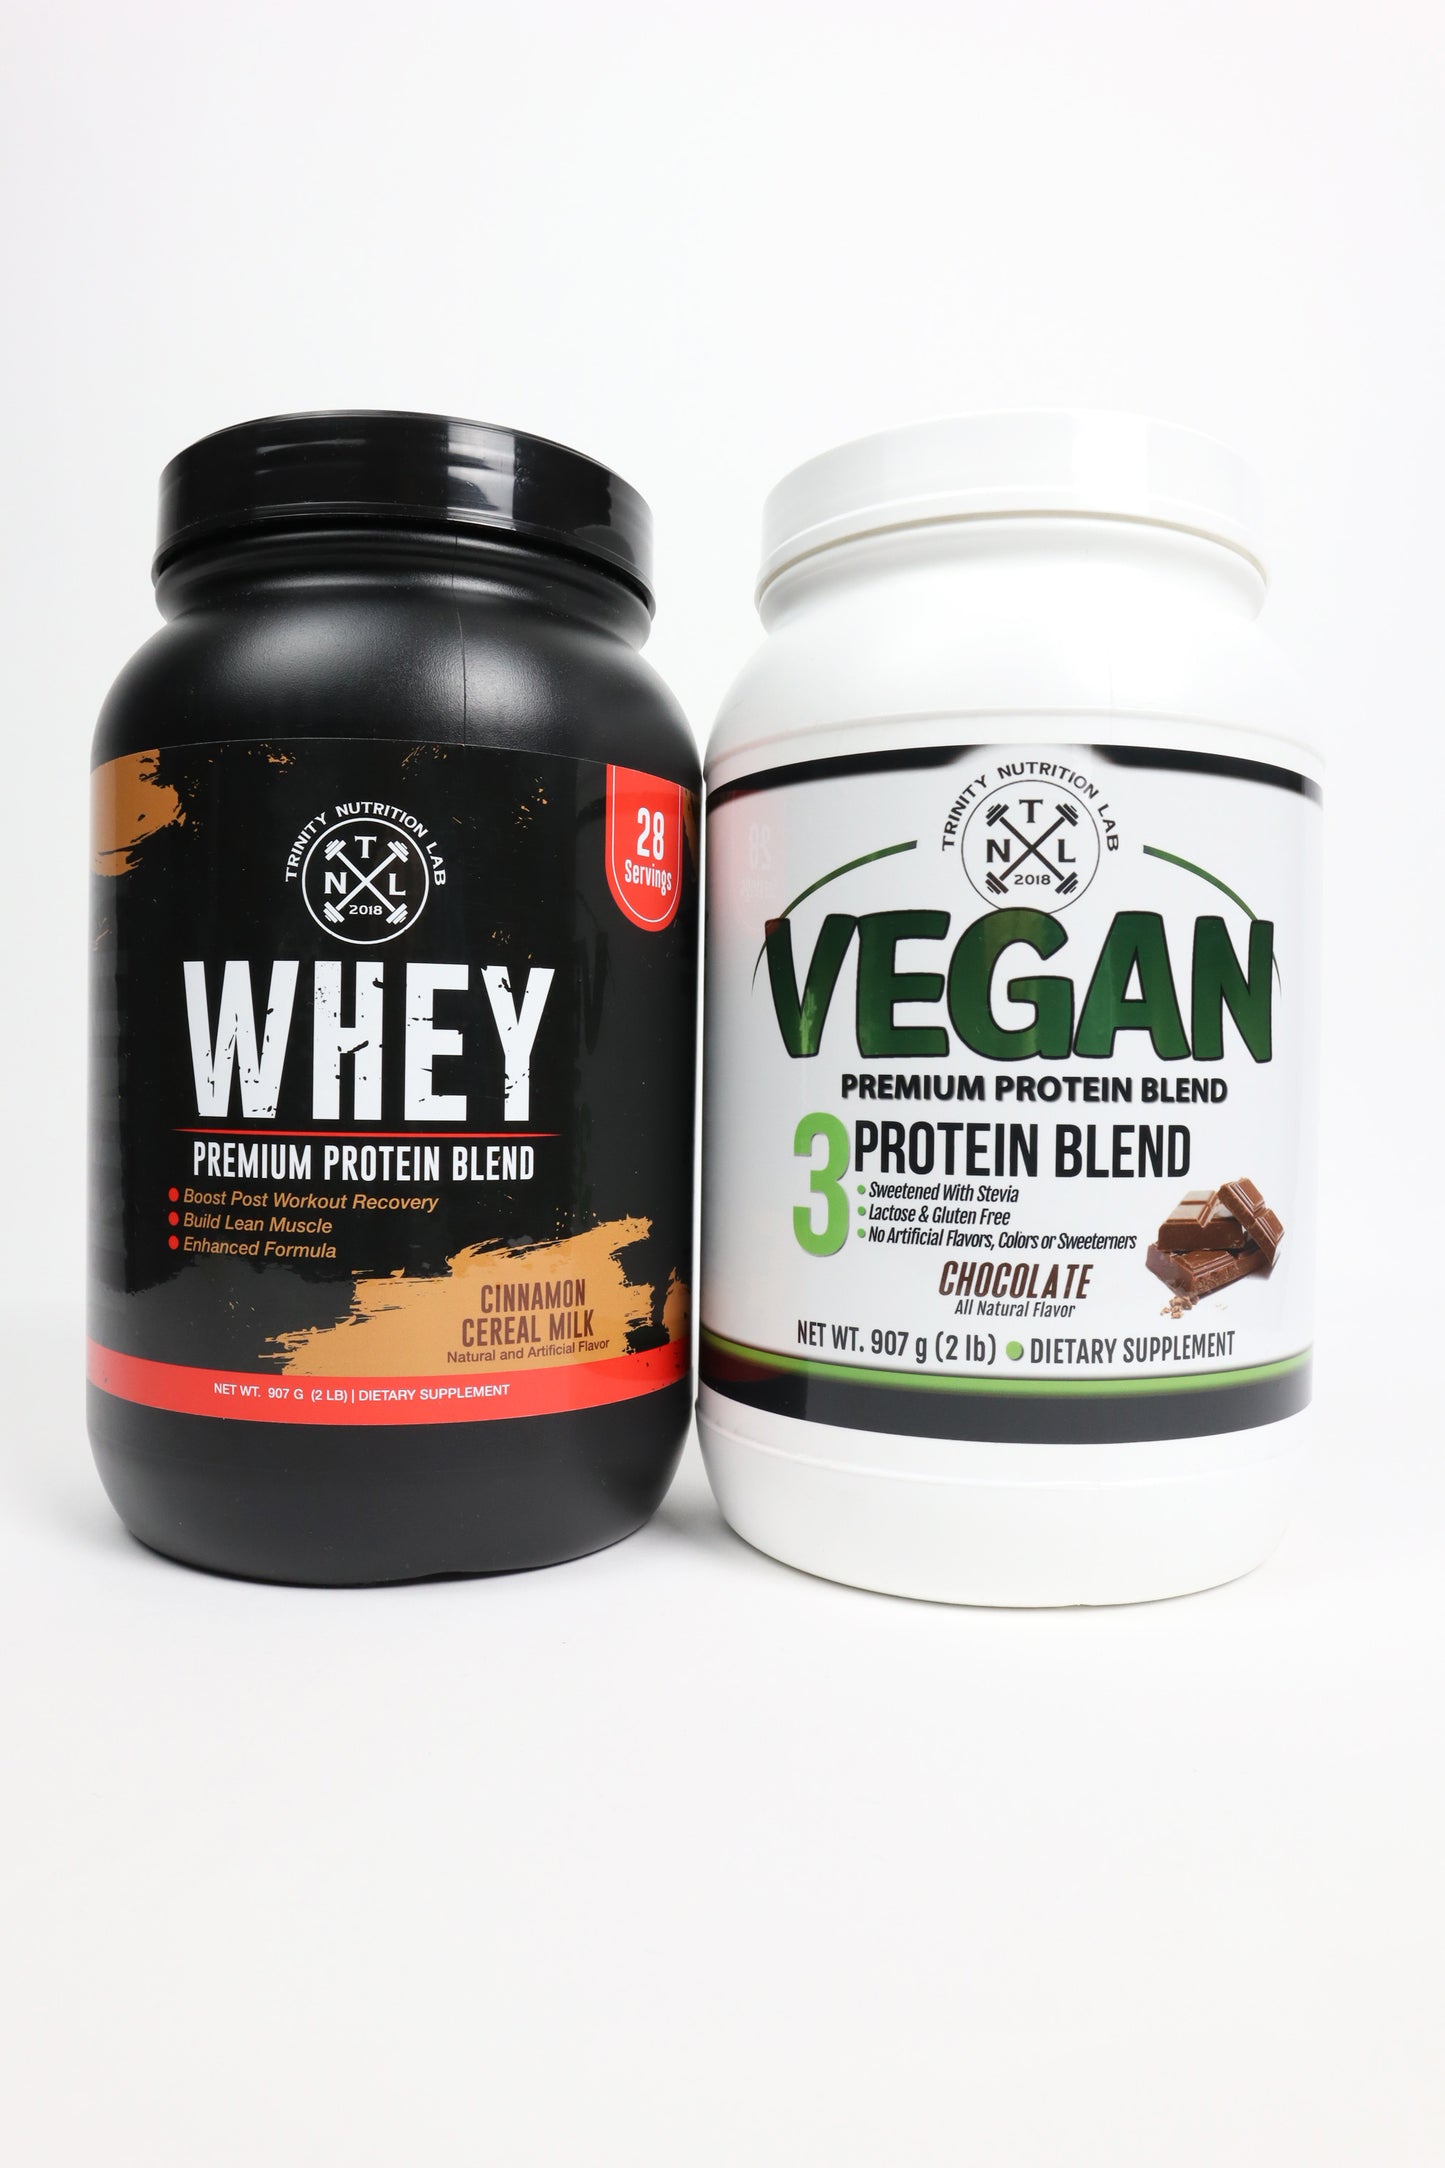 Vegan and Whey Protein Bundle